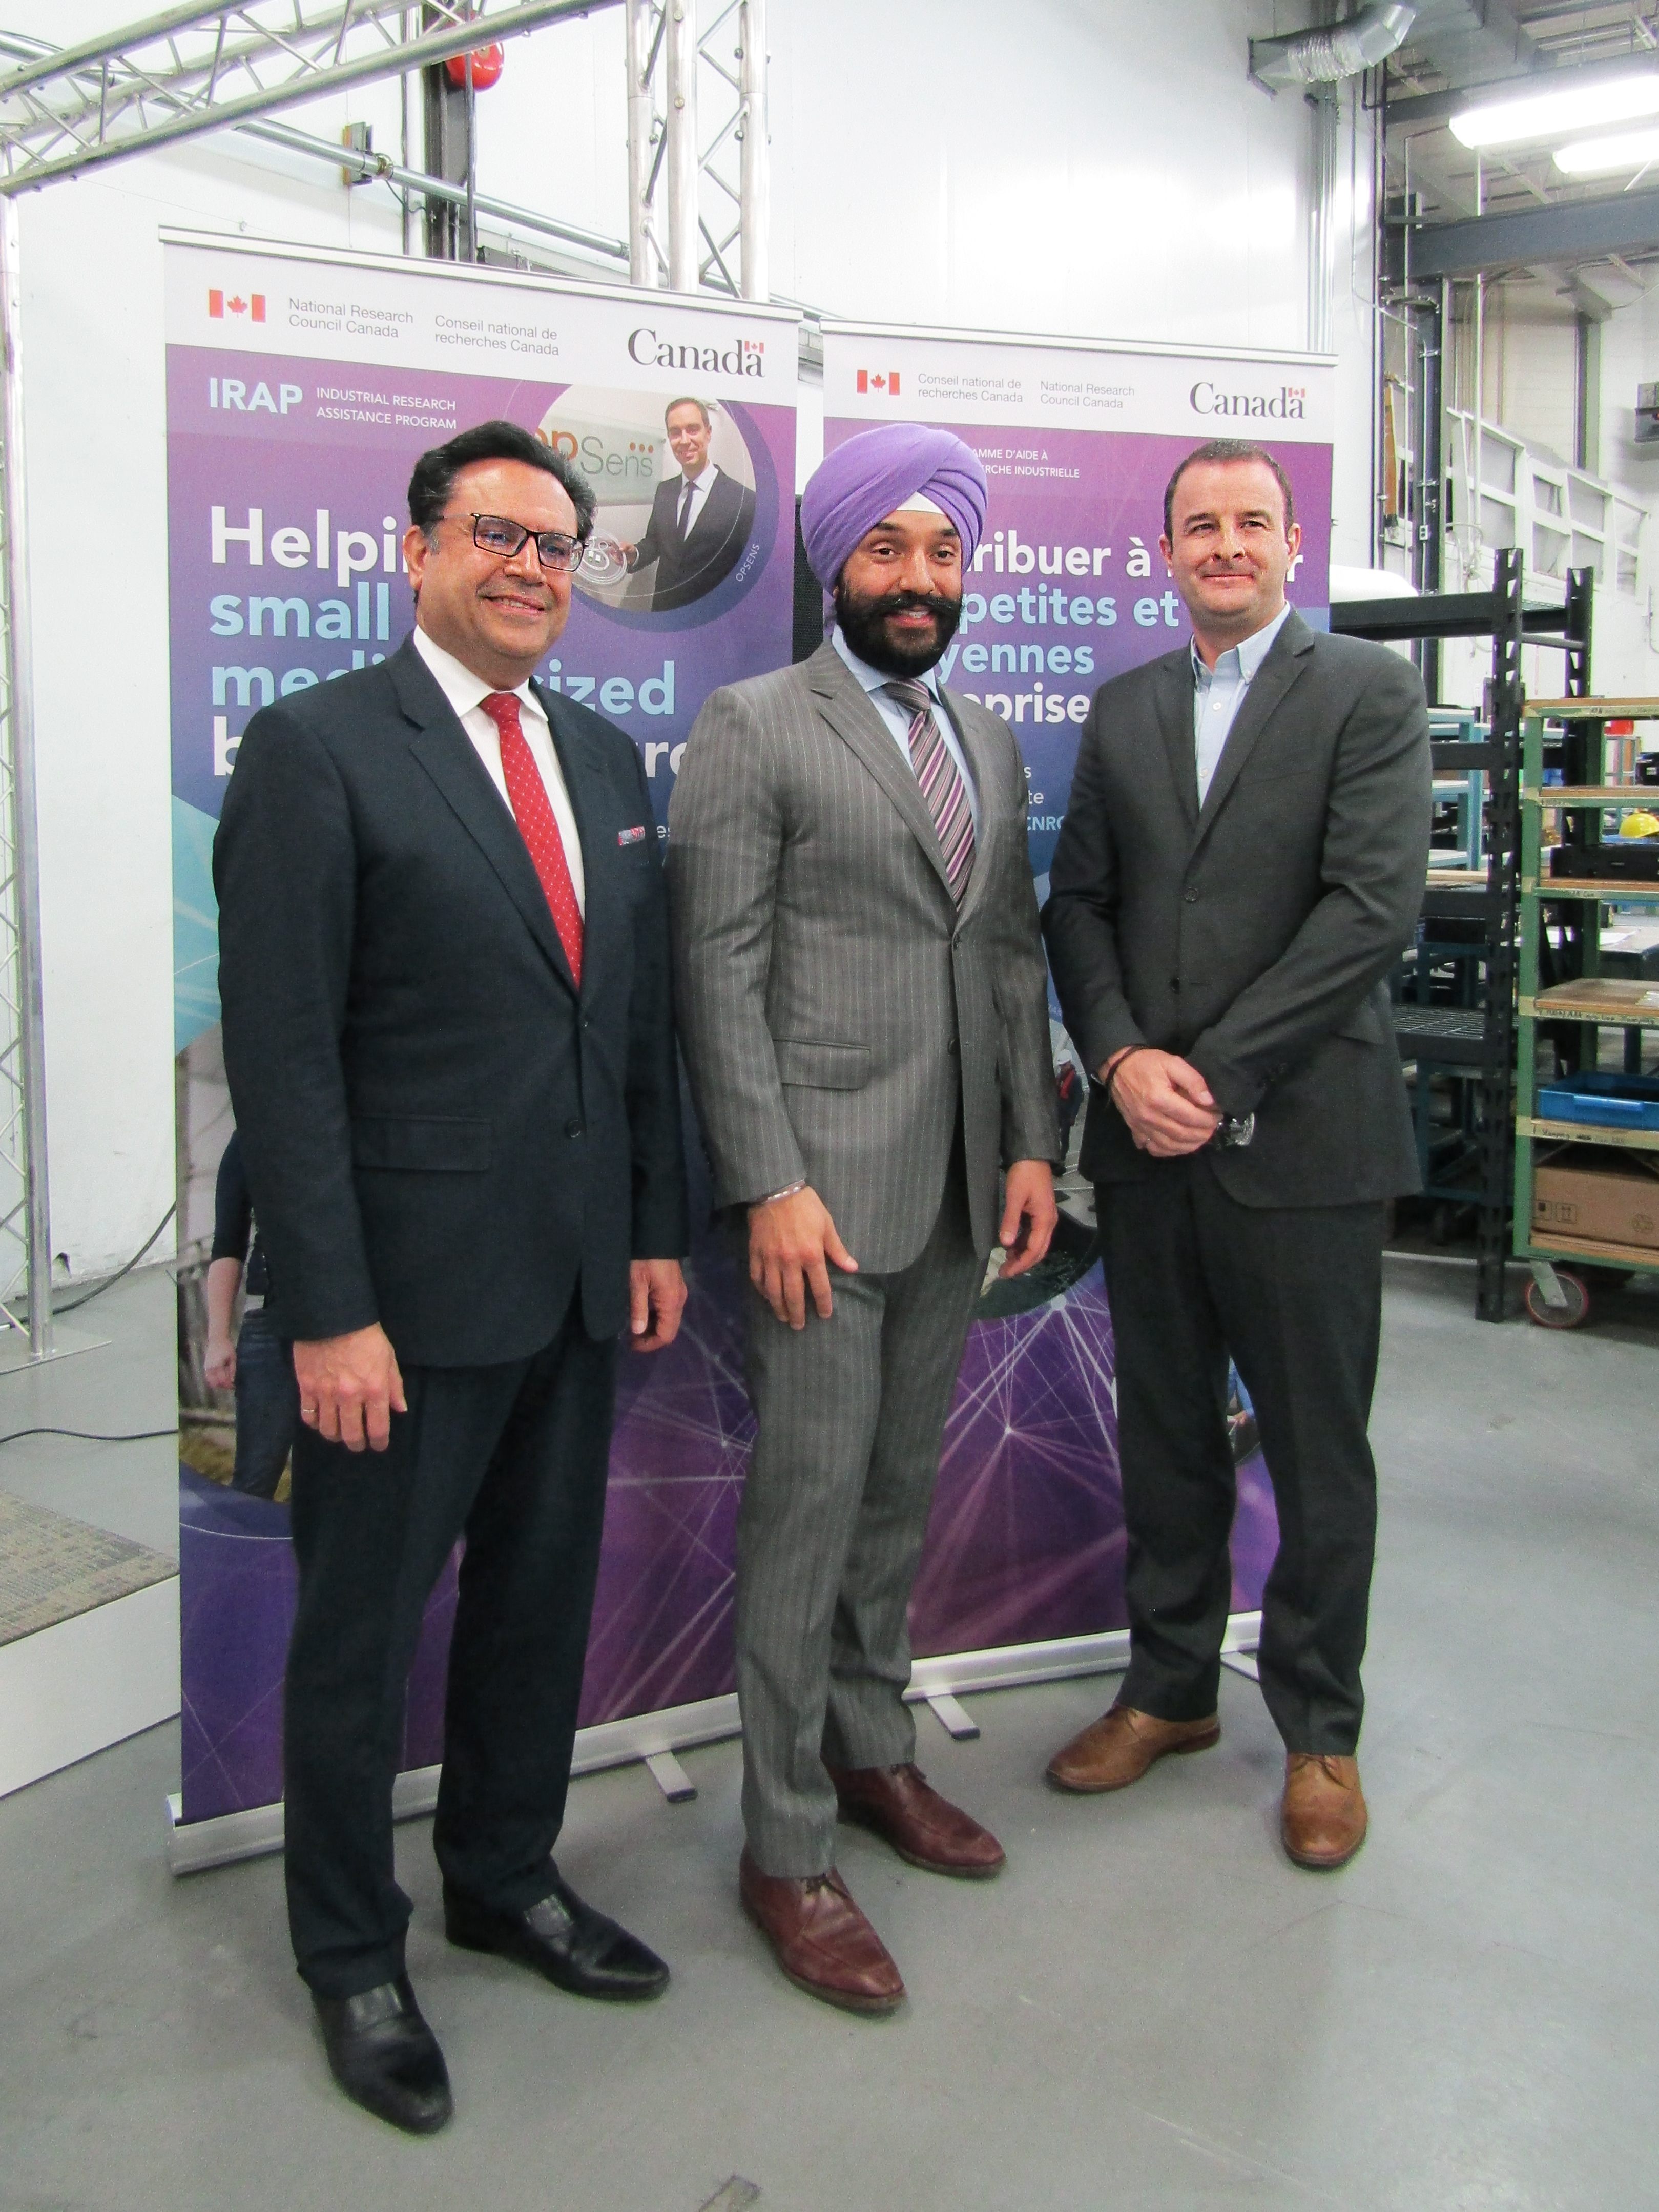 From Left: Richmond Hill's Member of Parliament, Majid Jowhari; The Honourable Navdeep Bains, Minister of Innovation, Science, and Economic Development; Joseph Hutton, Applanix Dir. of Inertial Tech & Airborne Products